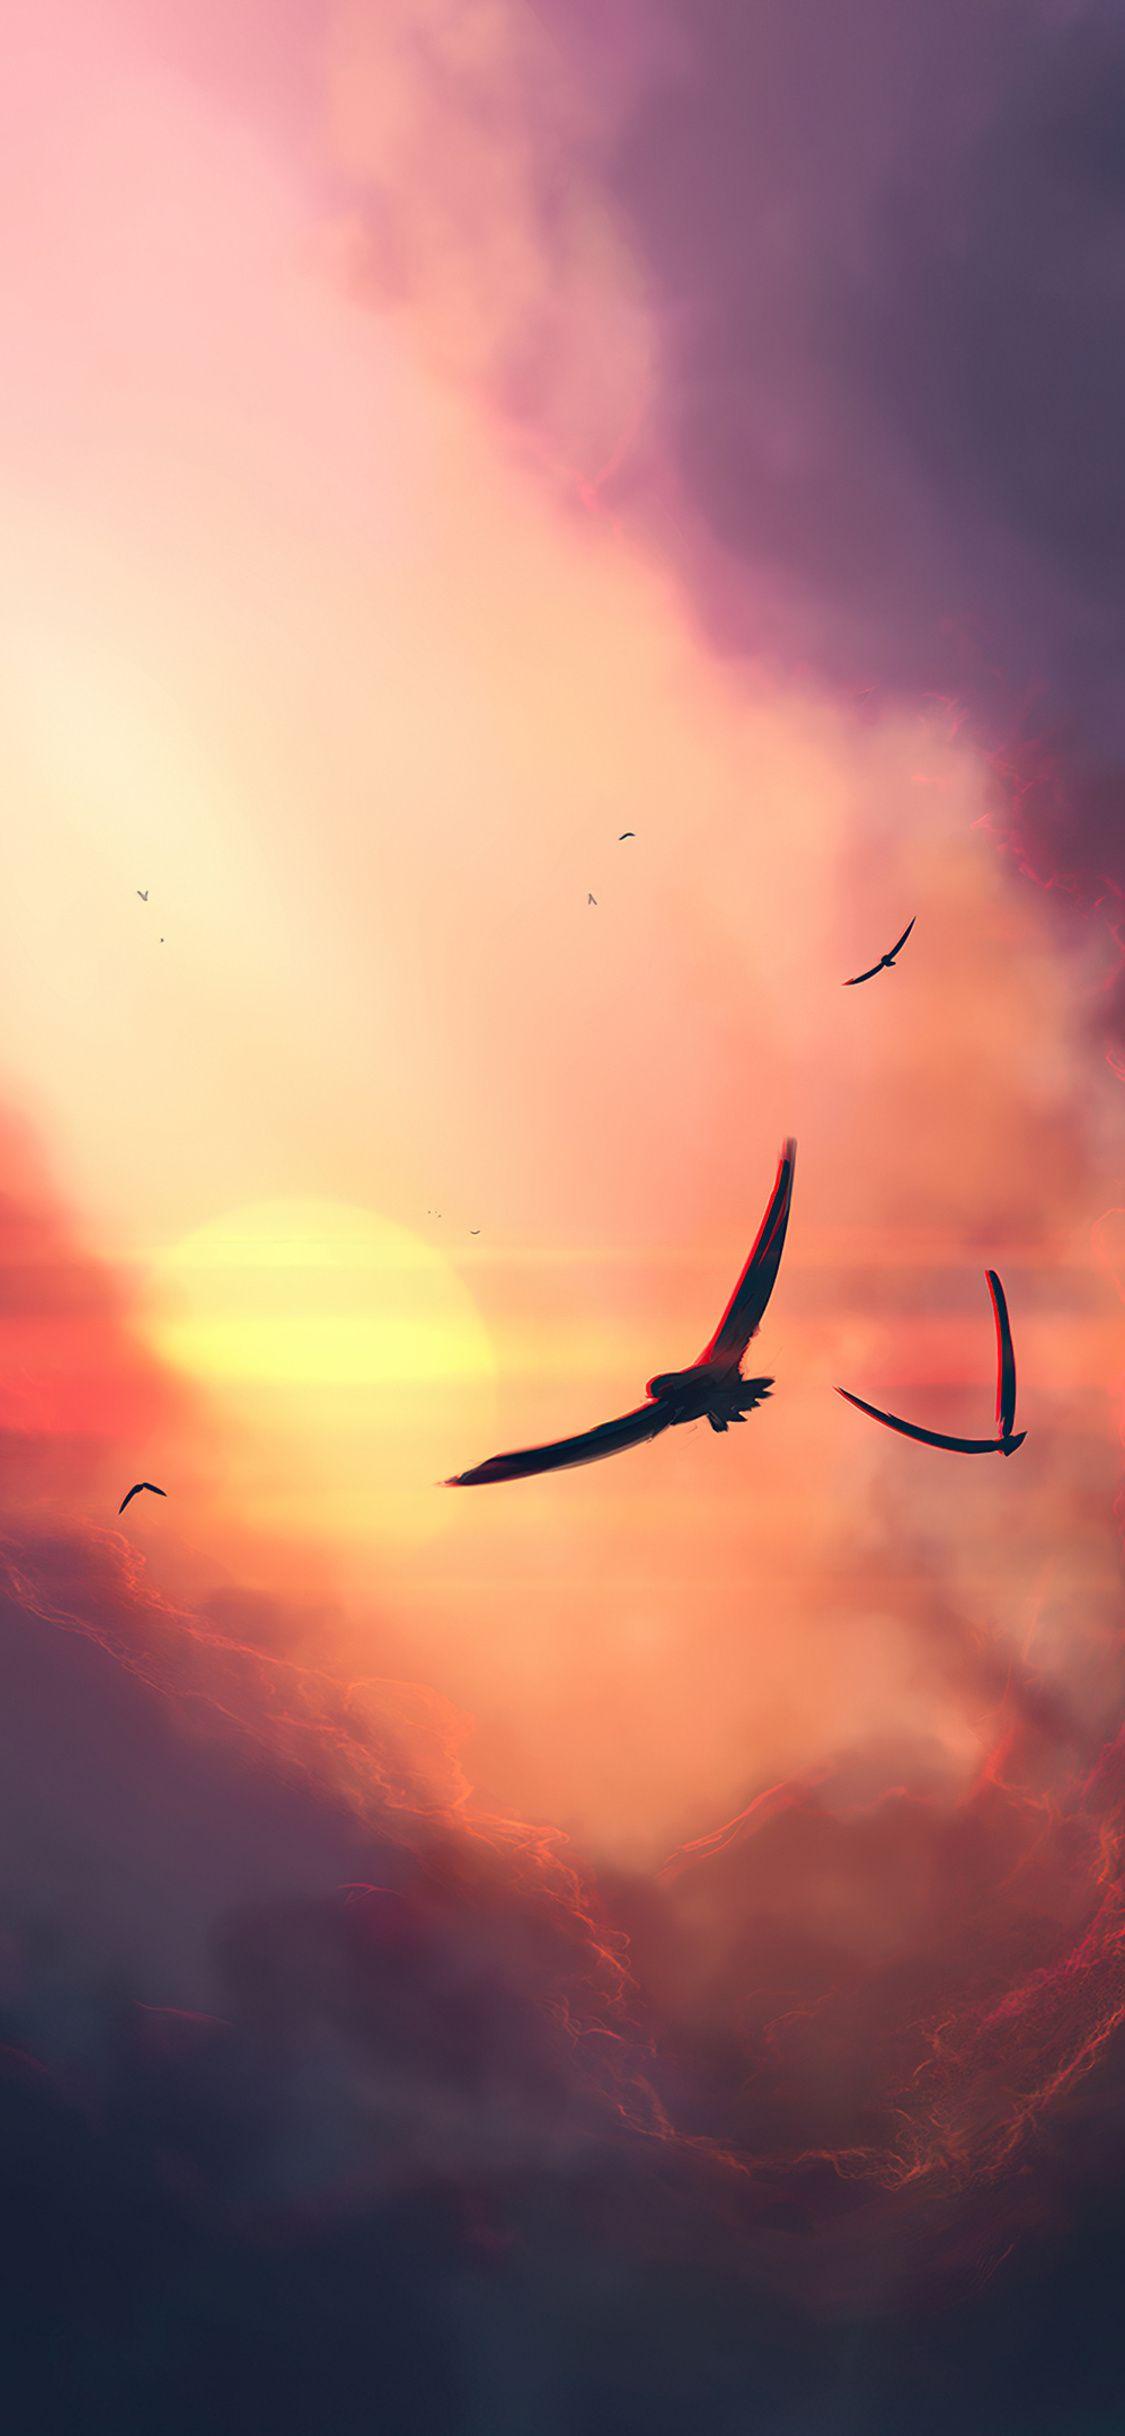 Birds and Clouds Wallpapers - Top Free Birds and Clouds Backgrounds